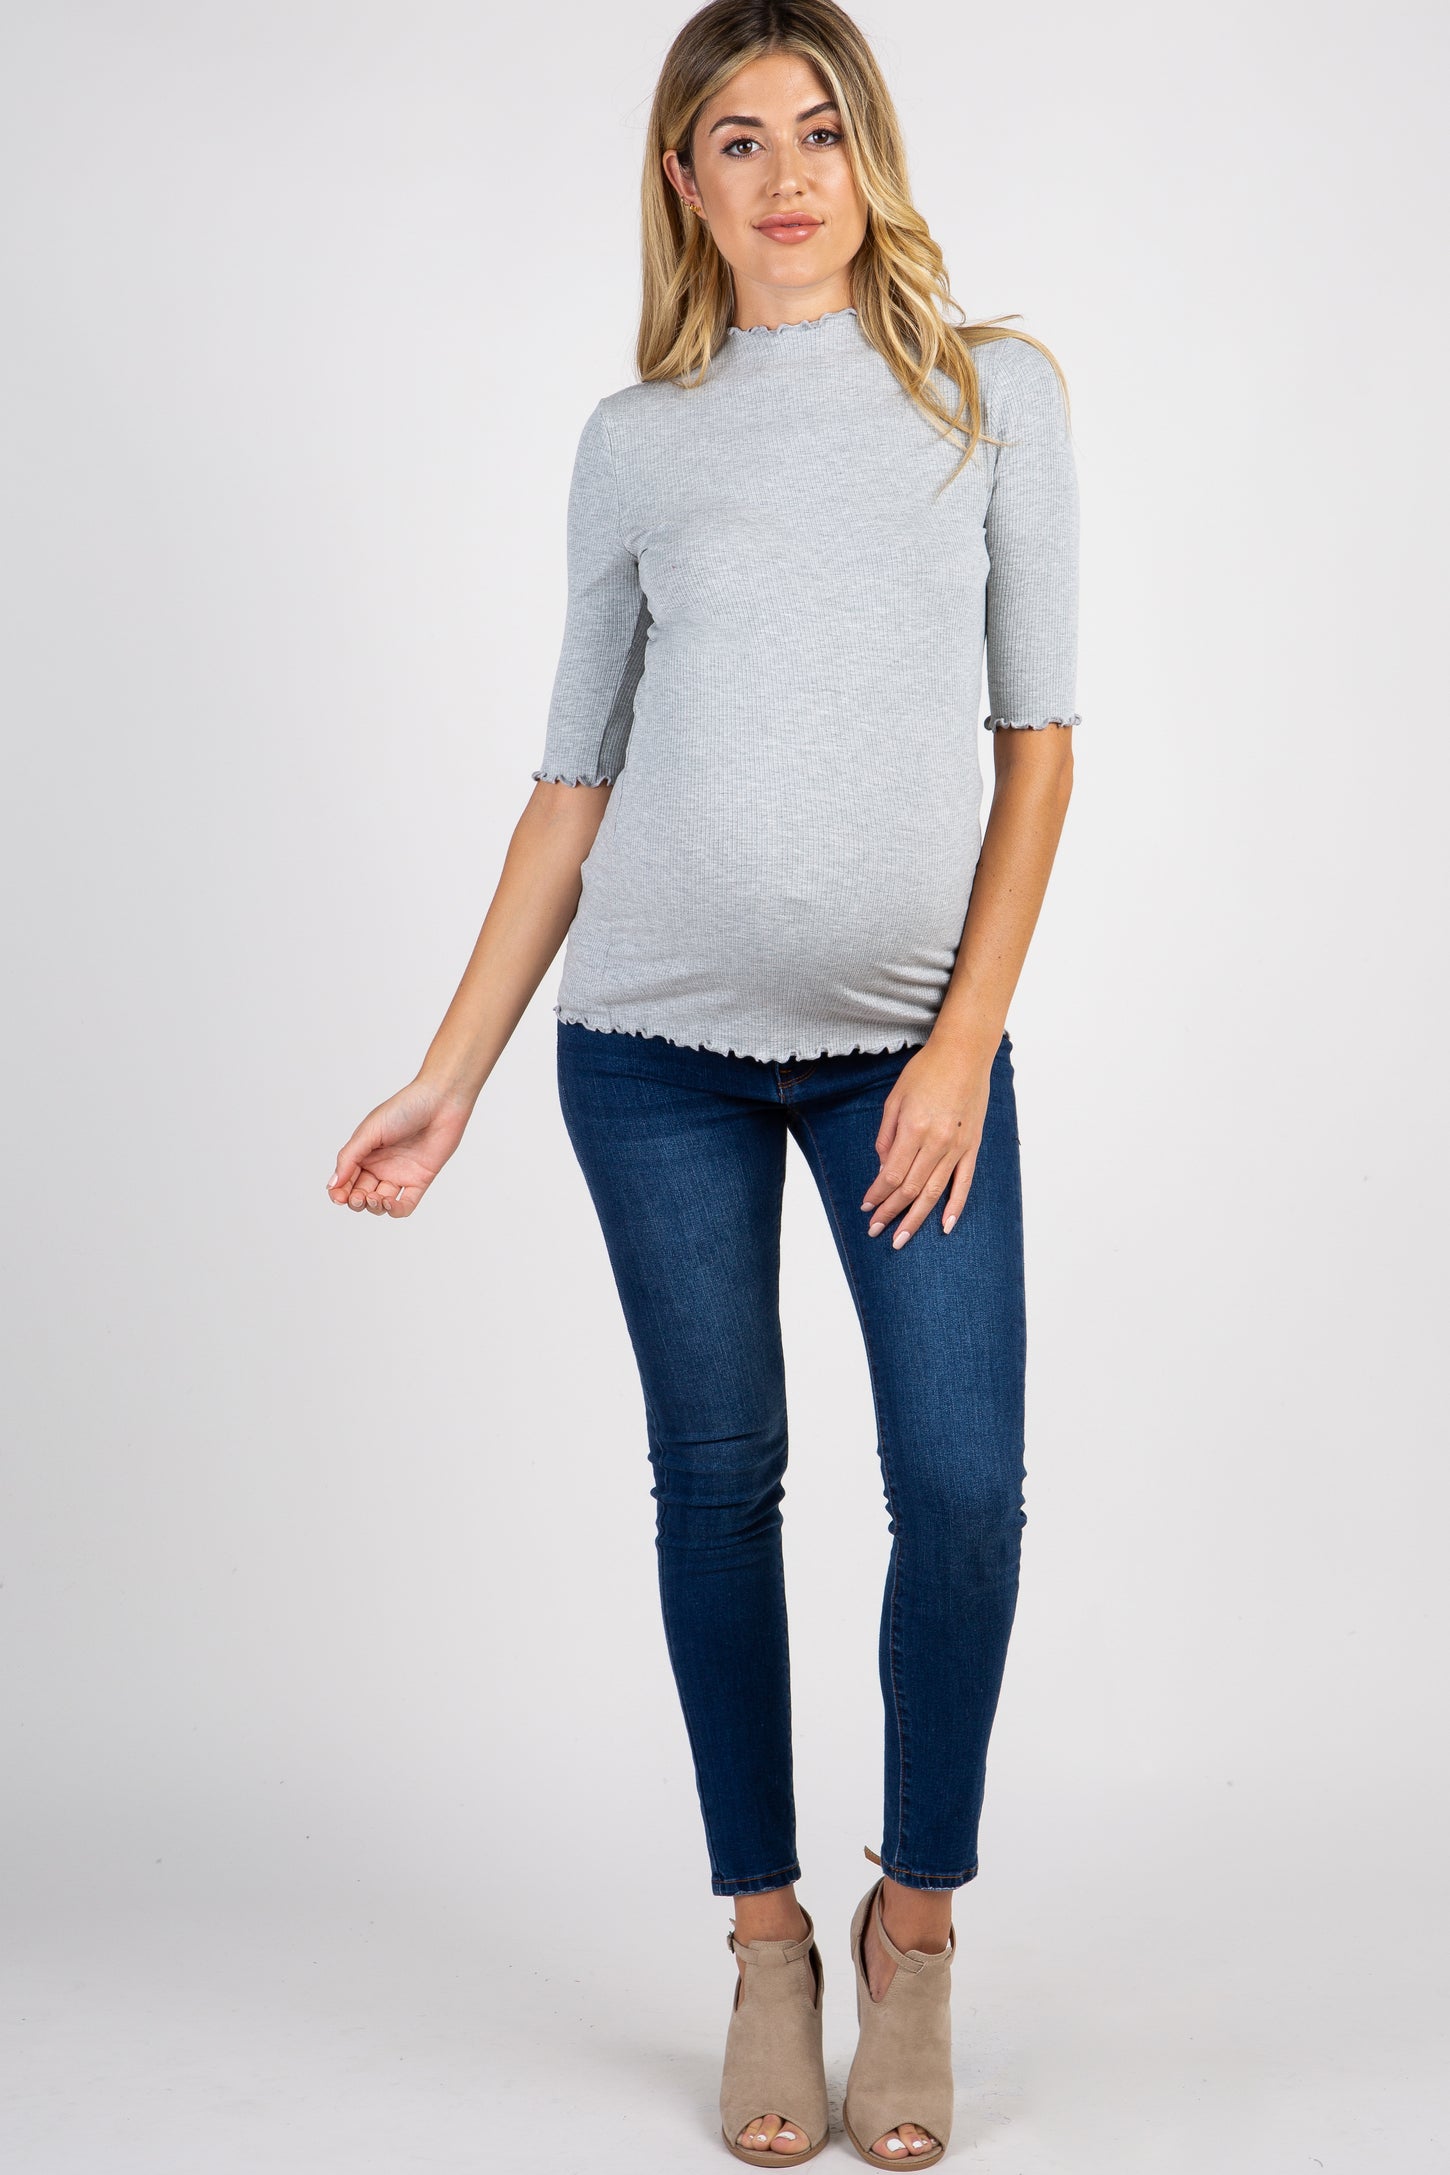 PinkBlush Grey Lettuce Hem Fitted Maternity Top